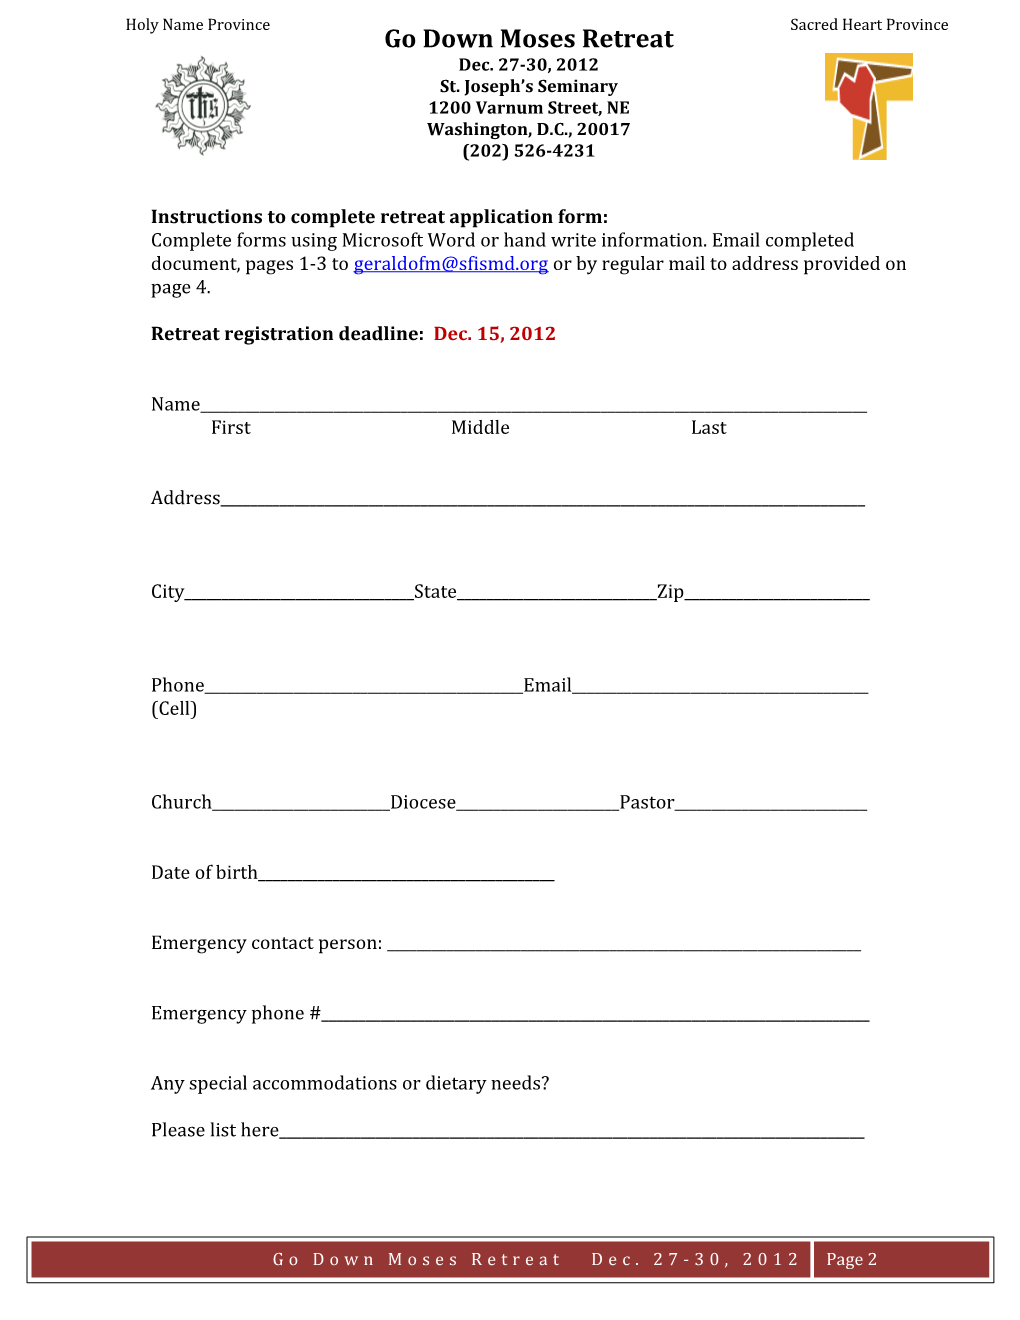 Instructions to Complete Retreat Application Form